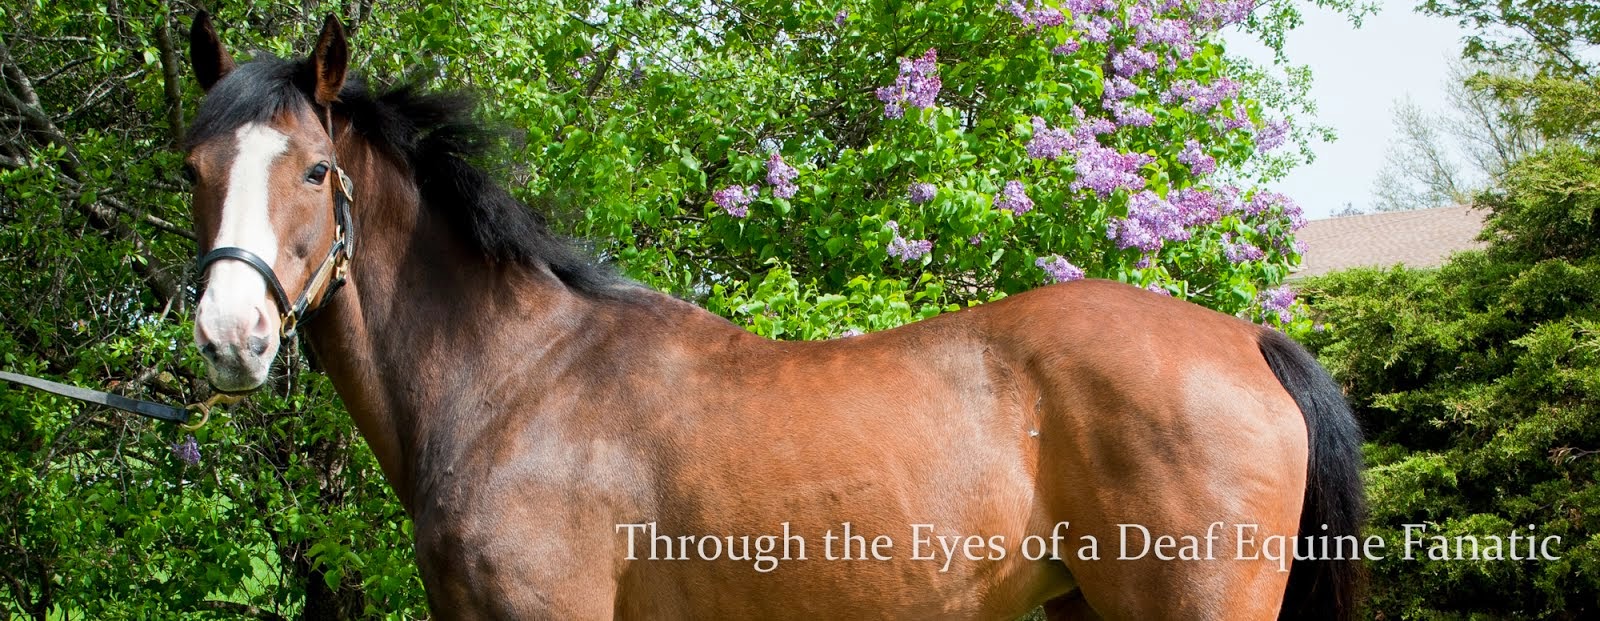 Through the Eyes of a Deaf Equine Fanatic